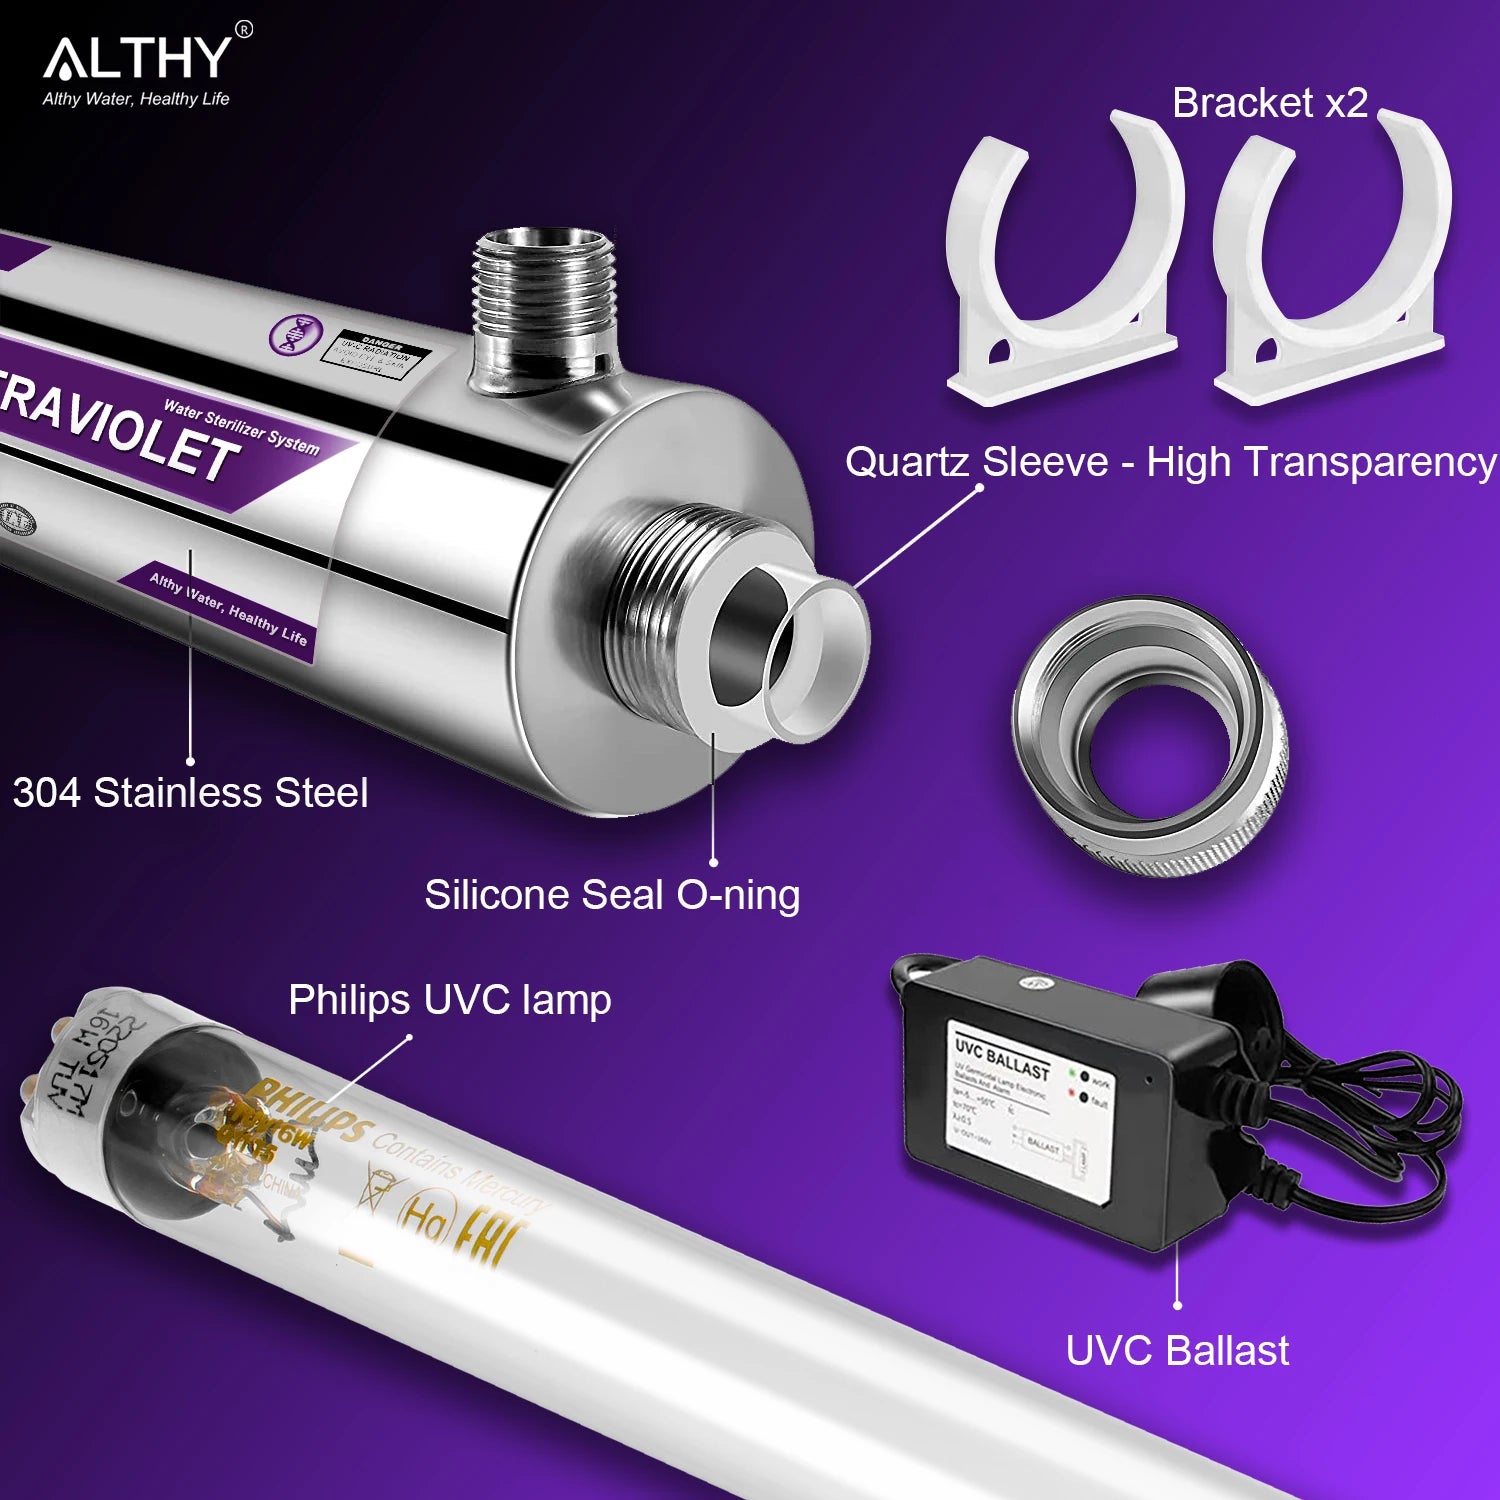 ALTHY Stainless Steel UV Water Sterilizer System Ultraviolet Tube Lamp Direct Drink Disinfection Filter Purifier 1GPM / 2GPM